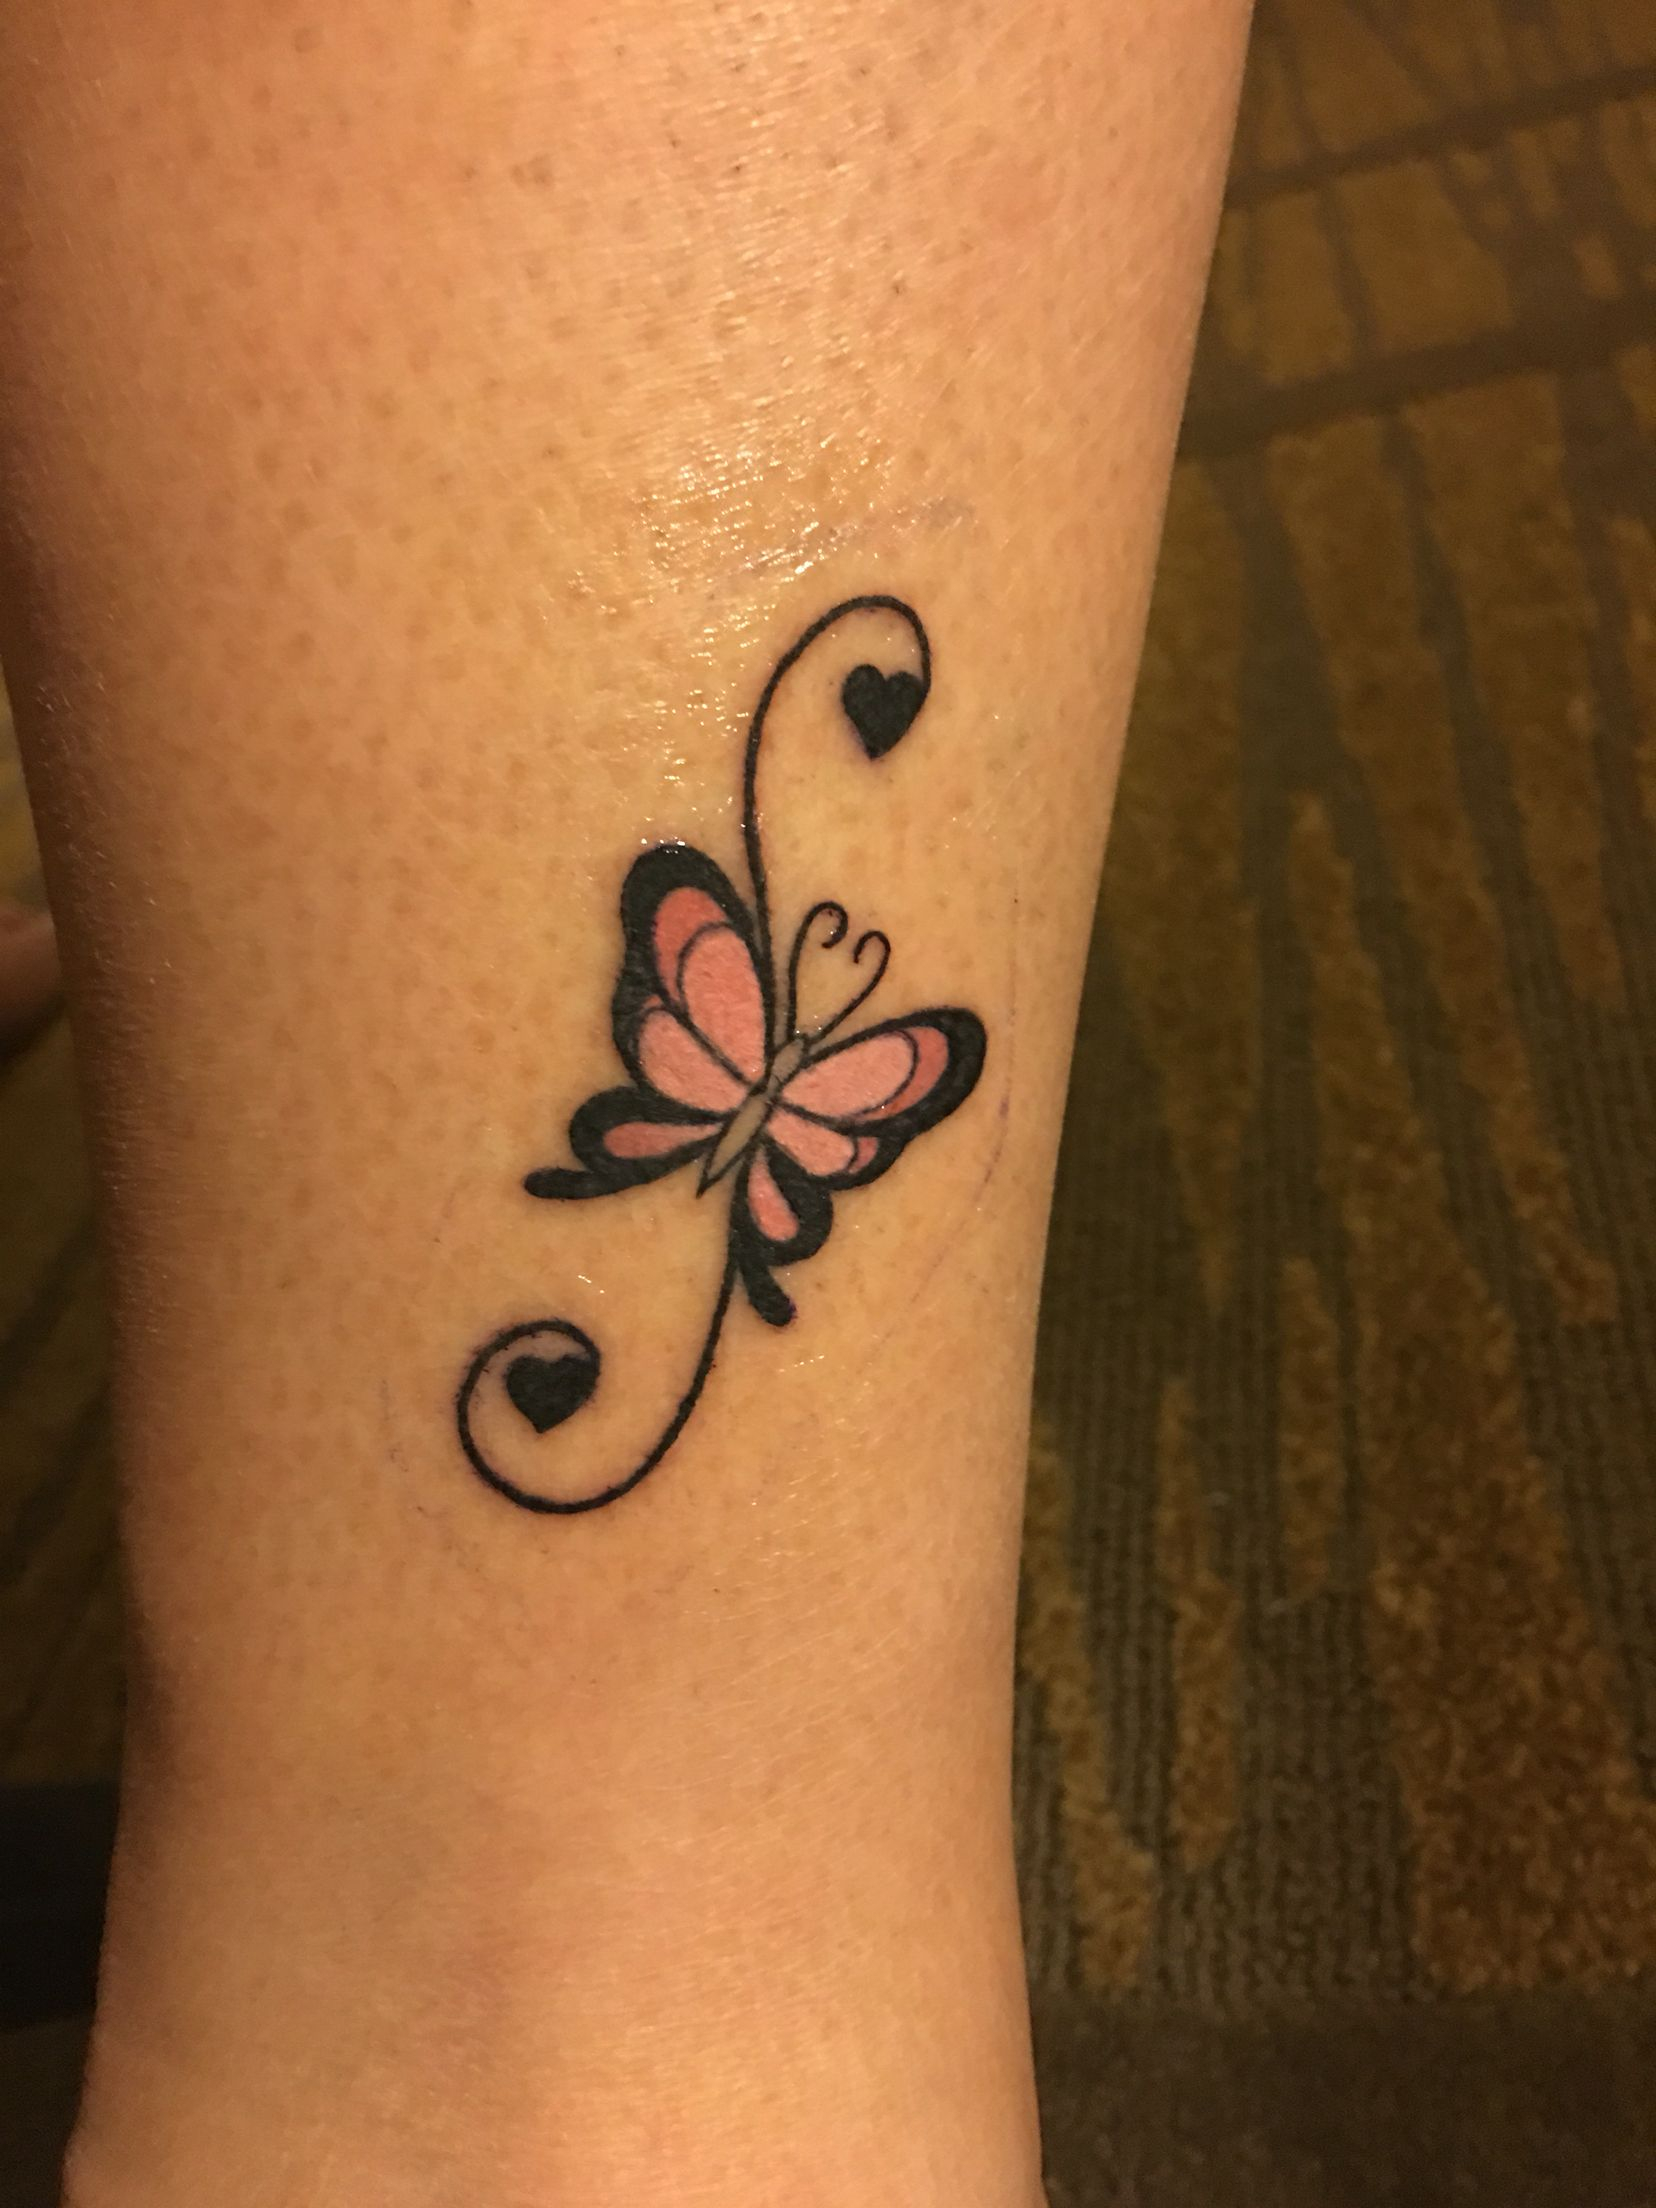 Feminine Butterfly Tattoo The Ankle With Swirls And Hearts The within dimensions 1656 X 2208